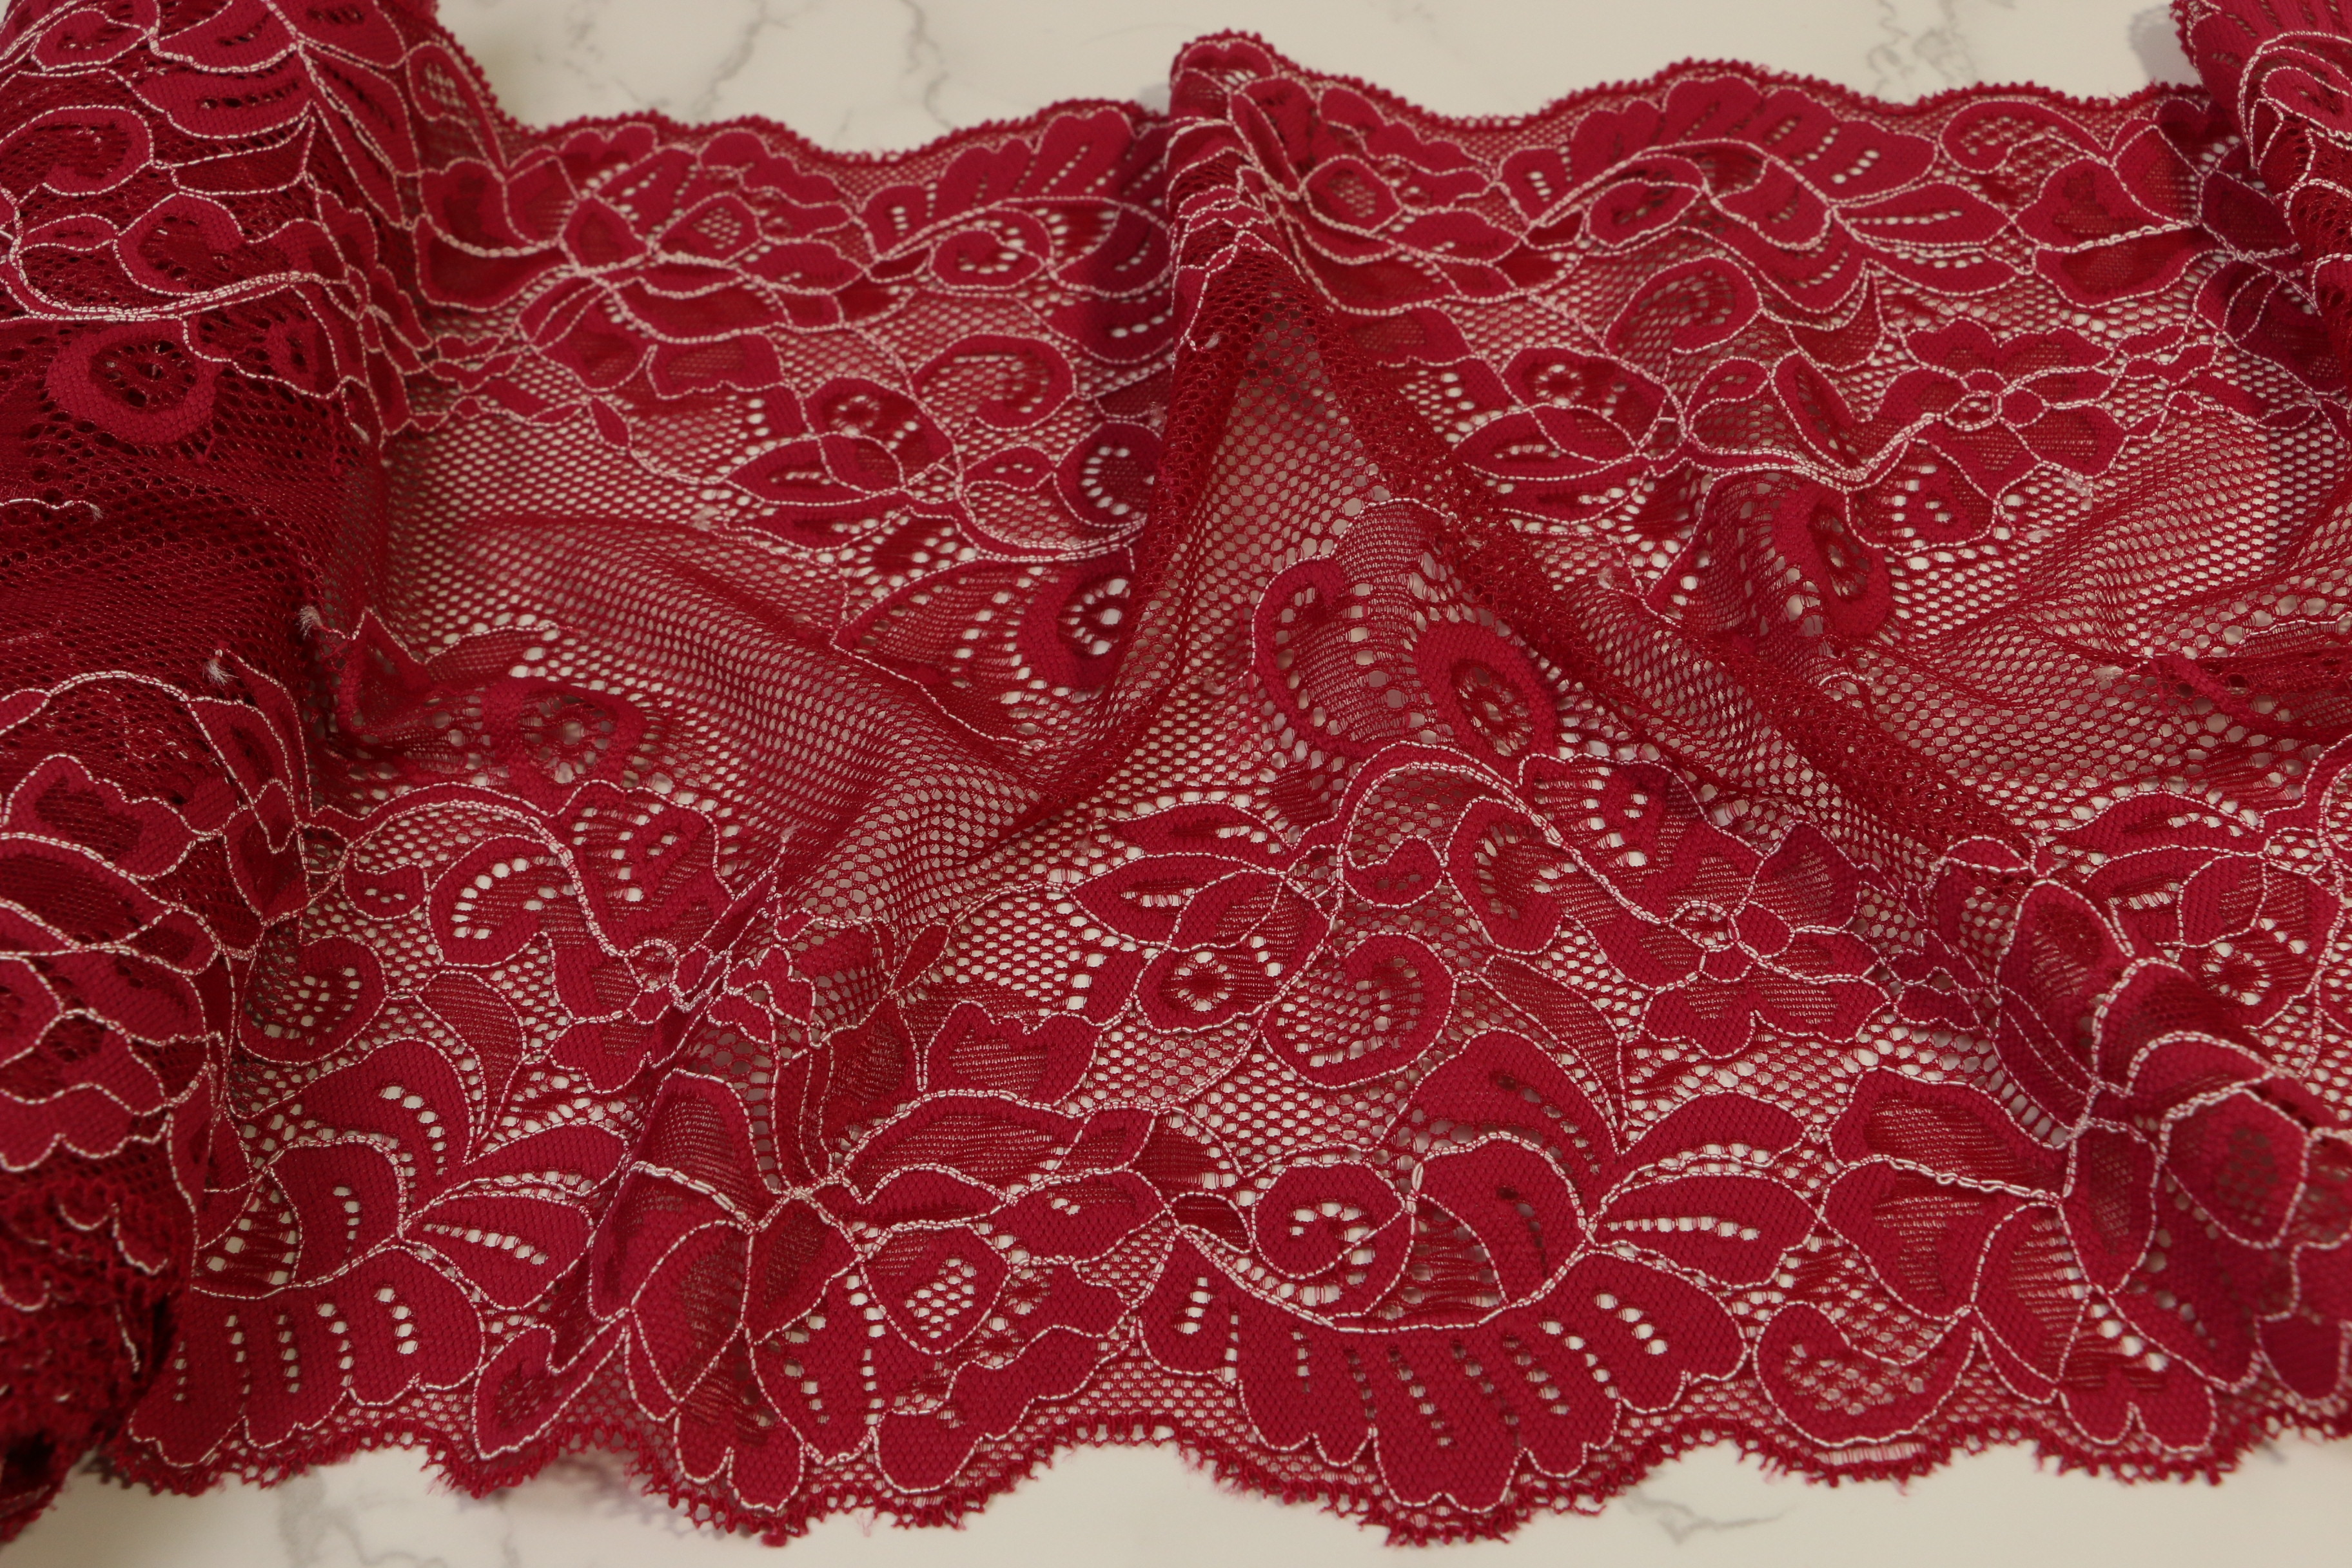  Camisole Lingerie Lace Trim Red Color Multifunctional 4 Way Stretch Manufactures